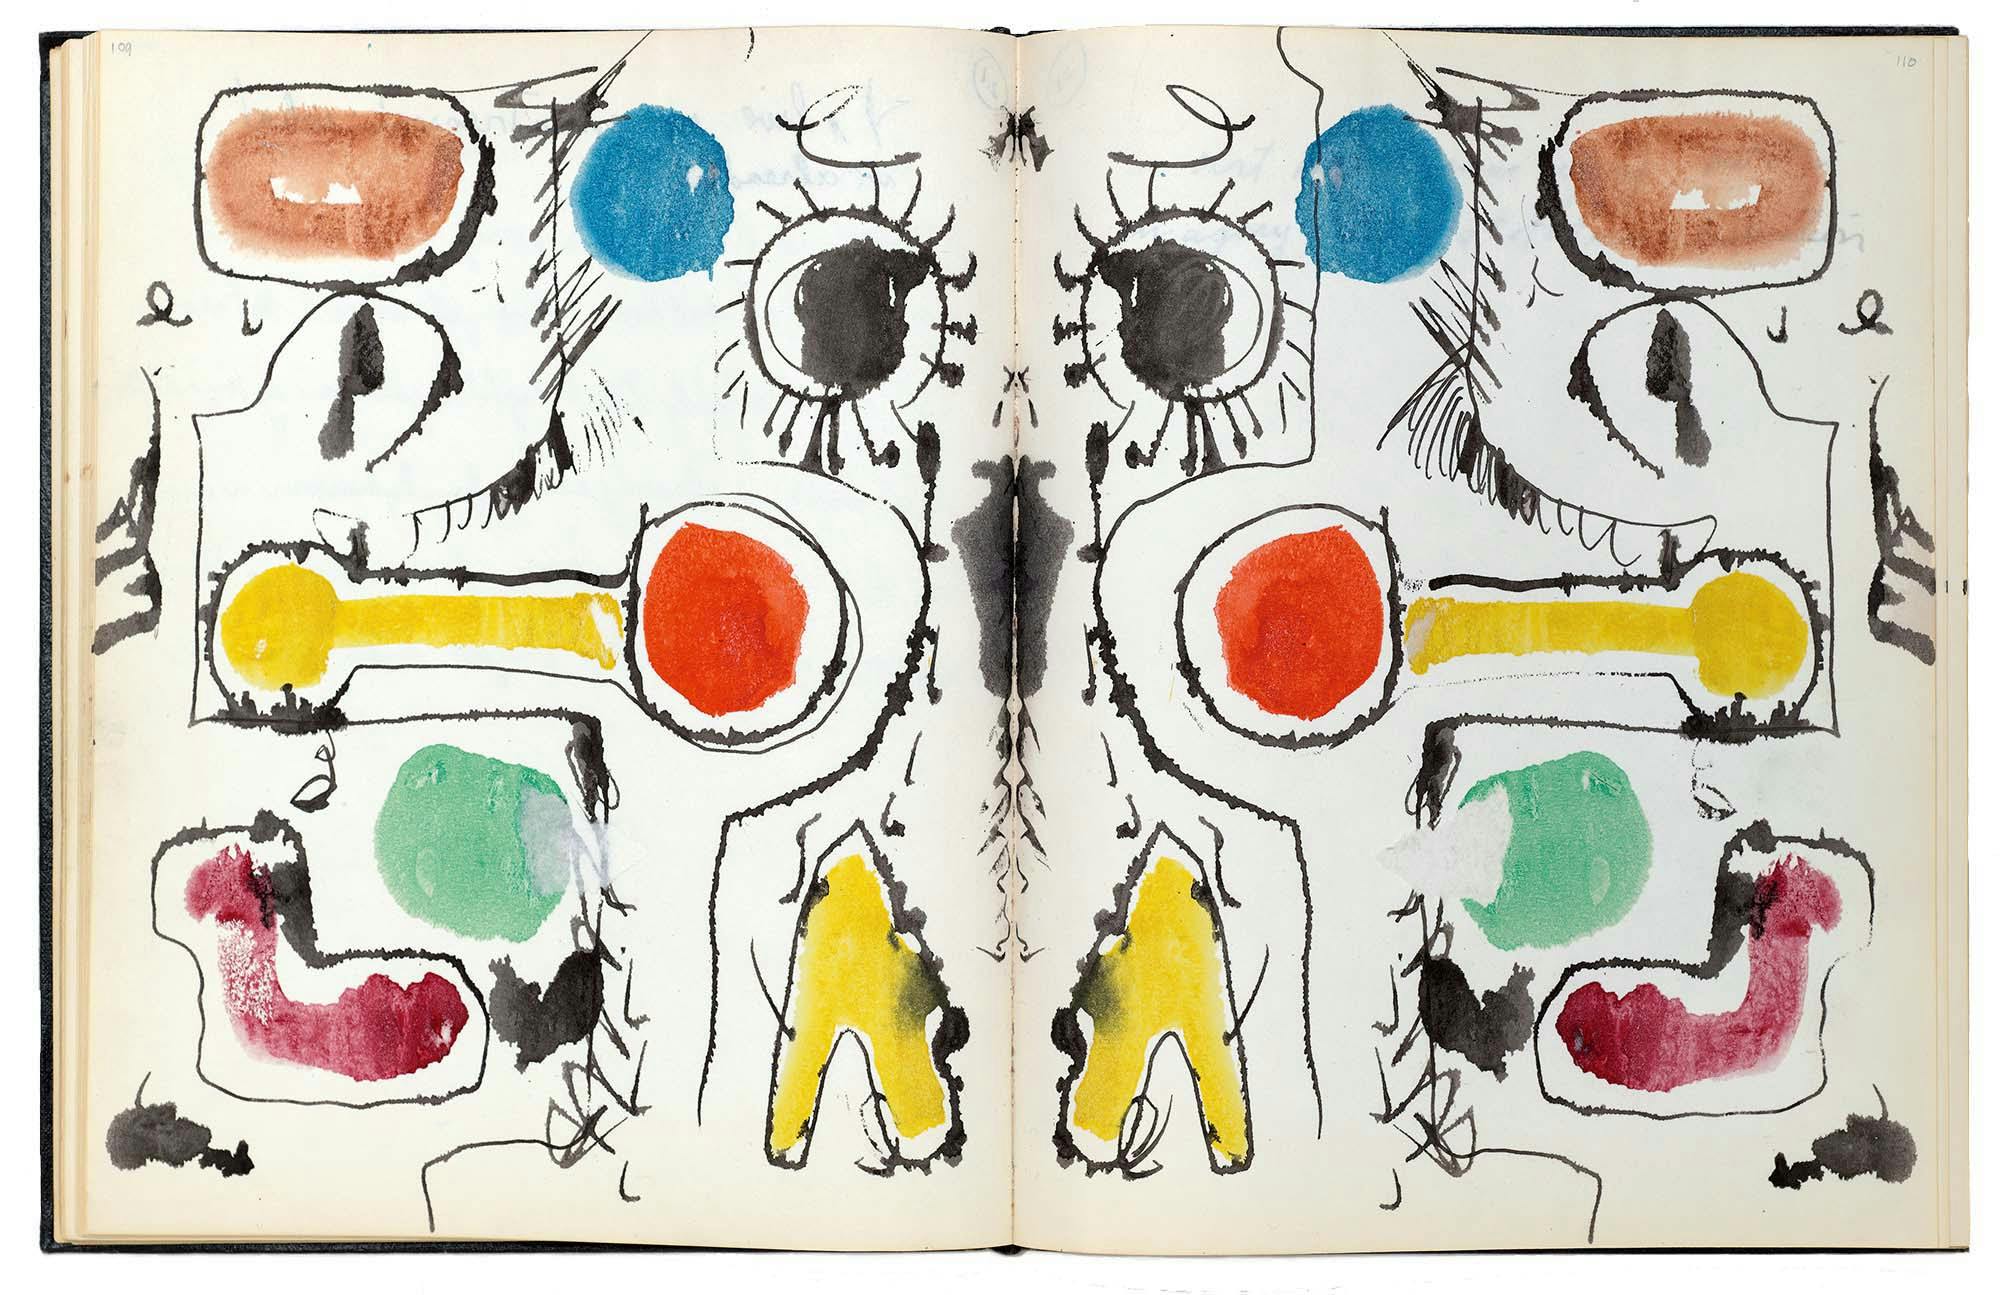 Notebook B-87 
1950s
Black sketch book
11 X 8 ½ in. (27.9 x 21.6 cm)
 – The Richard Pousette-Dart Foundation